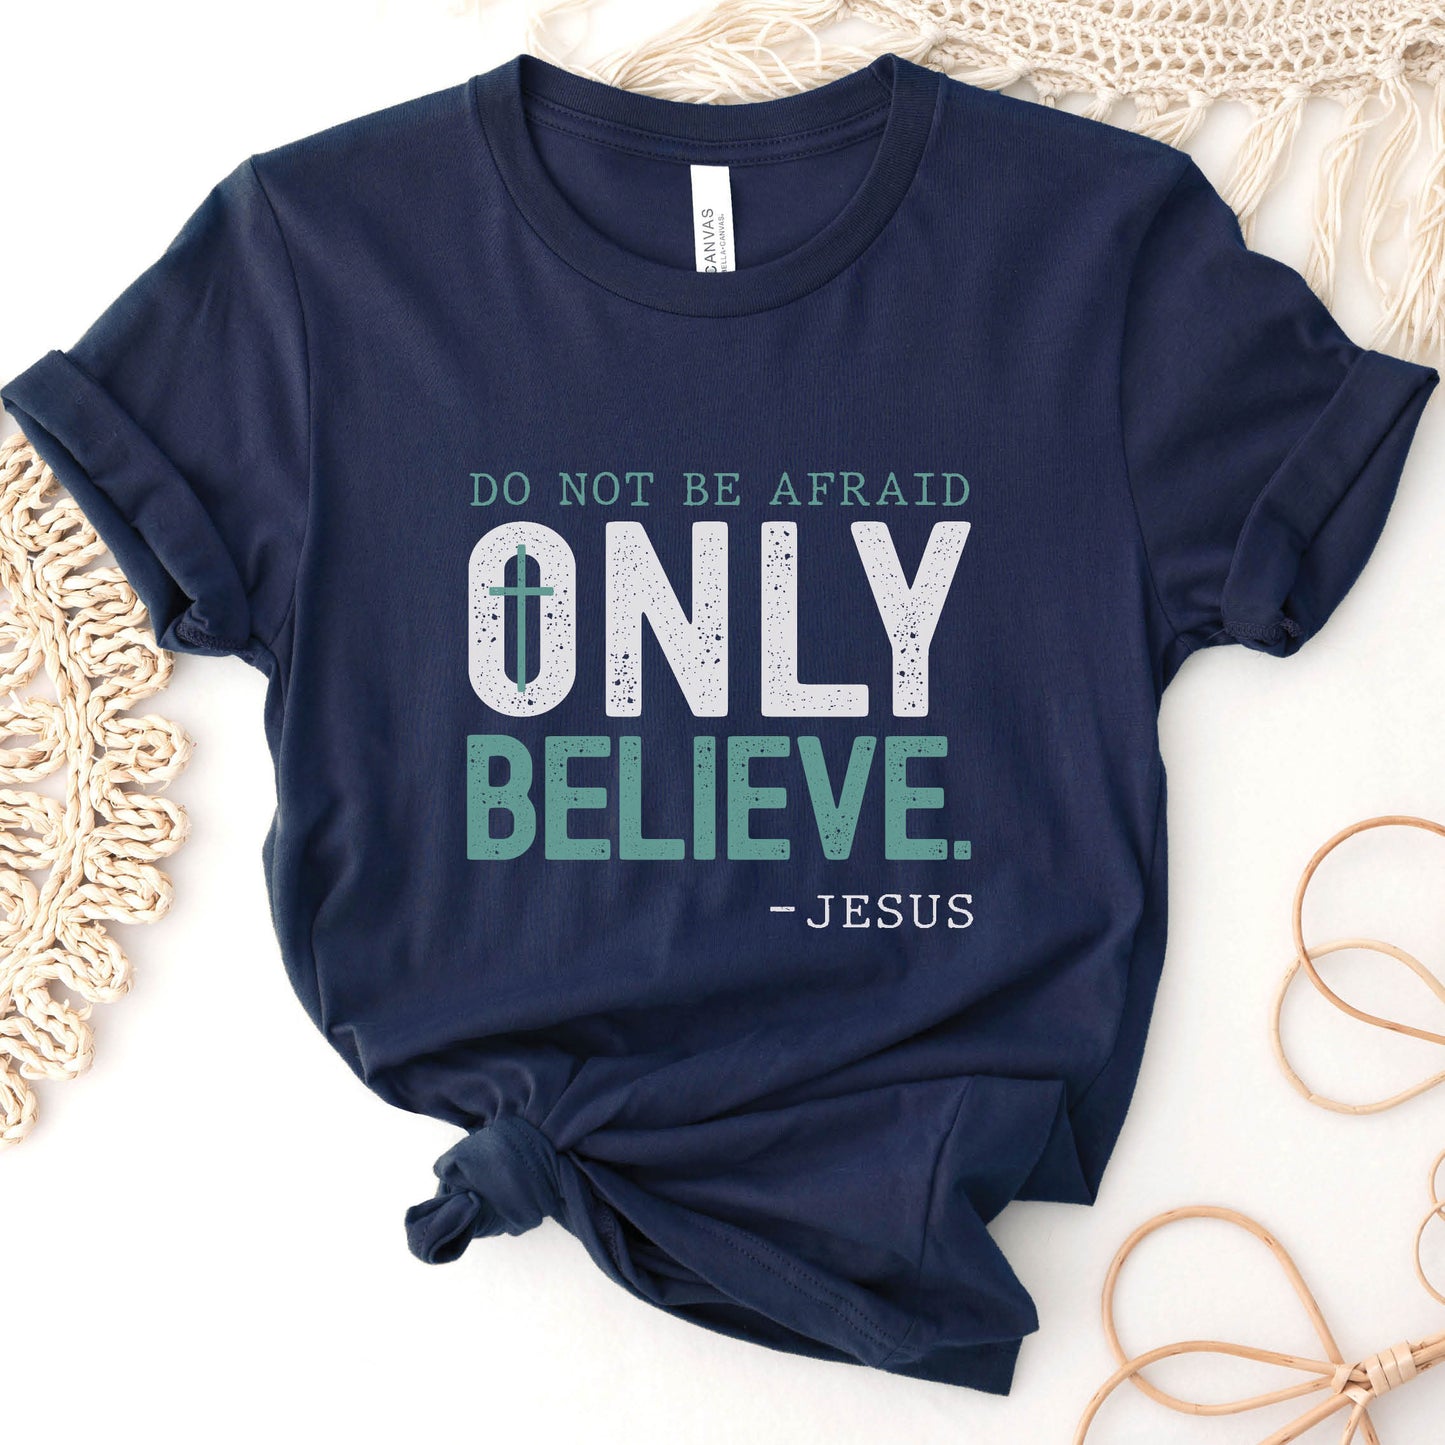 Do Not Be Afraid, Only Believe, Jesus Quote Christian aesthetic Mark 5:36 healing miracle bible verse textured white and teal wording printed on soft navy blue unisex t-shirt for men and women